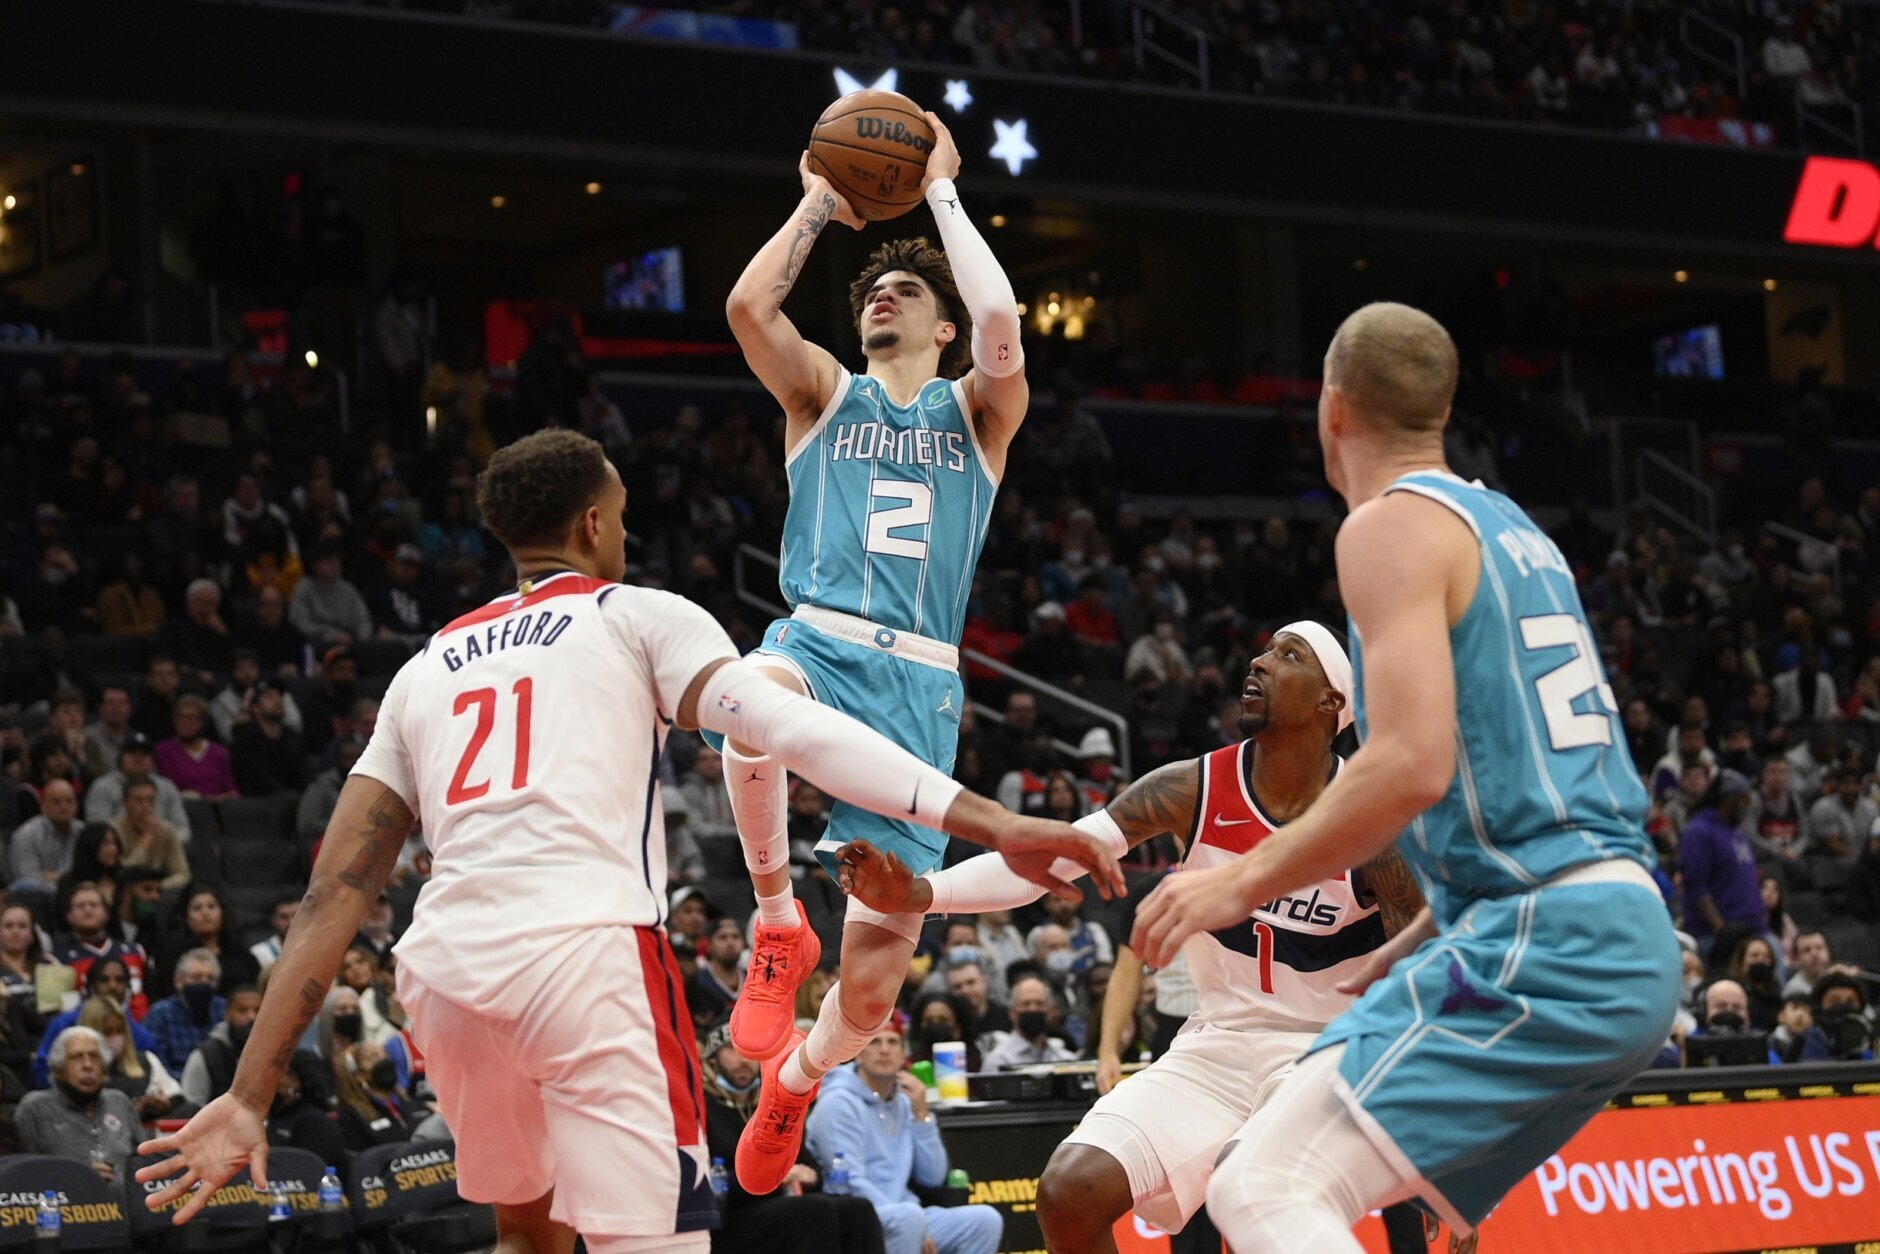 Rozier scores 26, Hayward 25 as Hornets rout Wizards 119-97